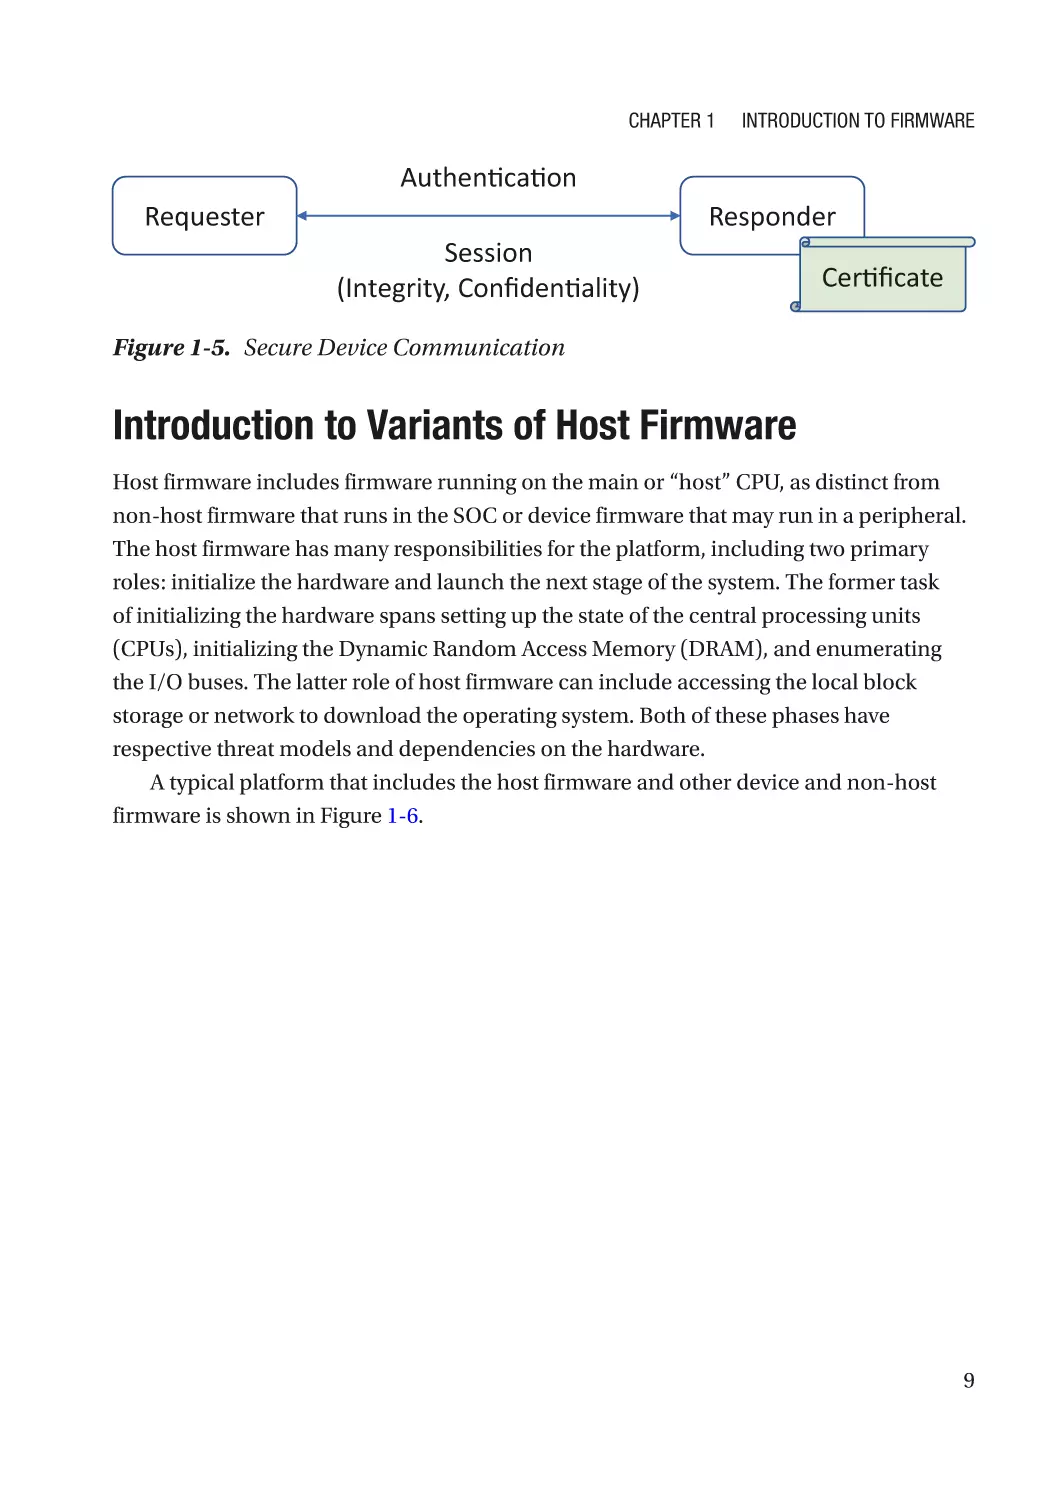 Introduction to Variants of Host Firmware